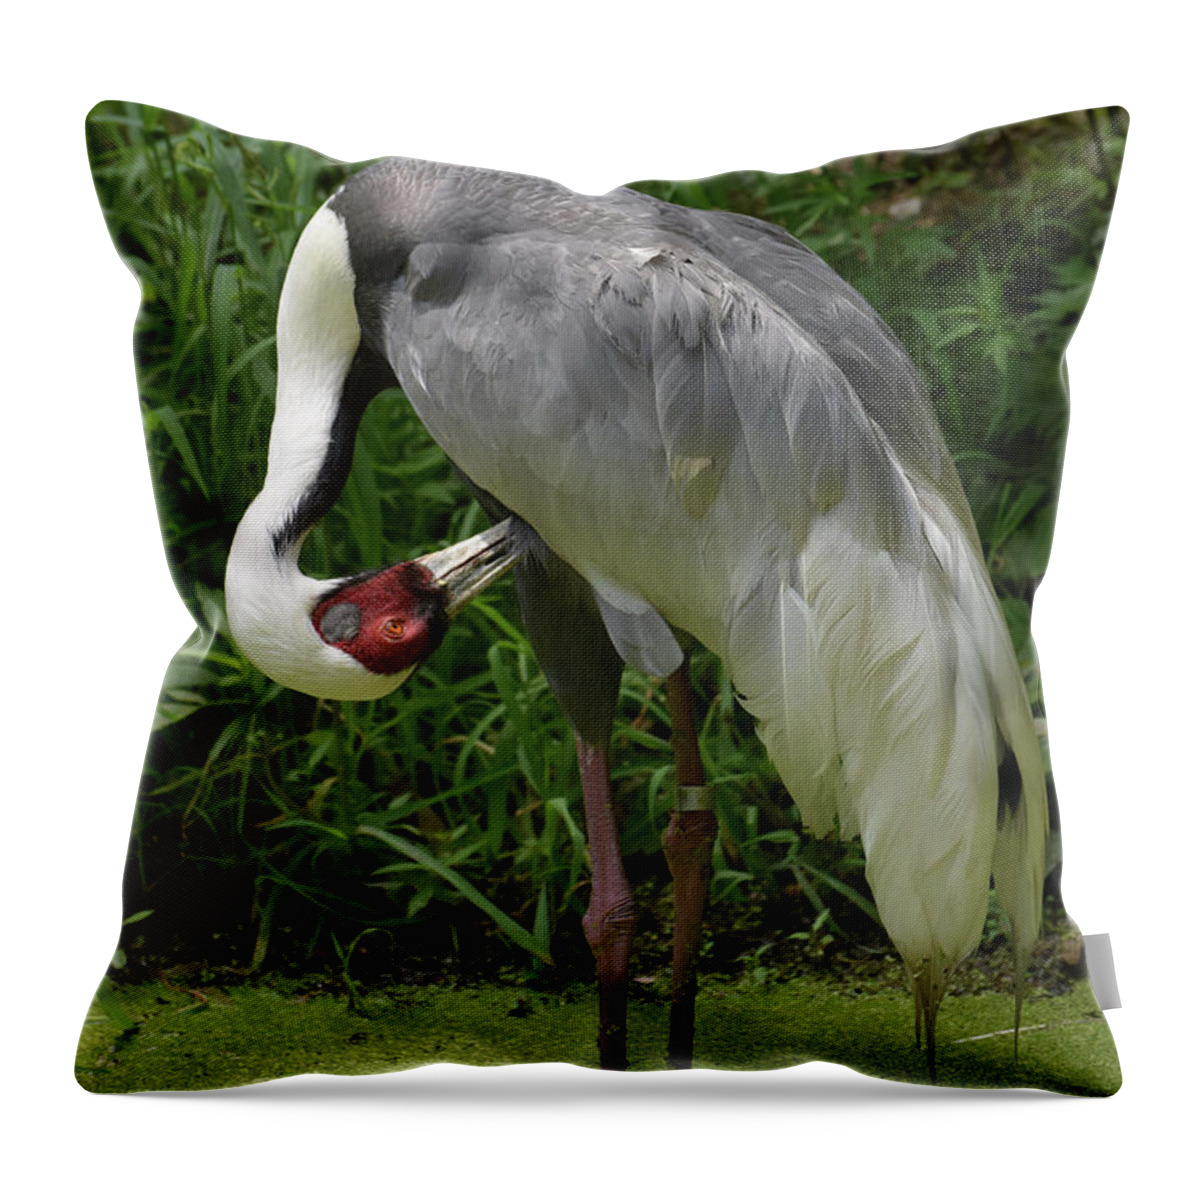 White-naped-crane Throw Pillow featuring the photograph Algae Covered Pond with a White Naped Crane by DejaVu Designs